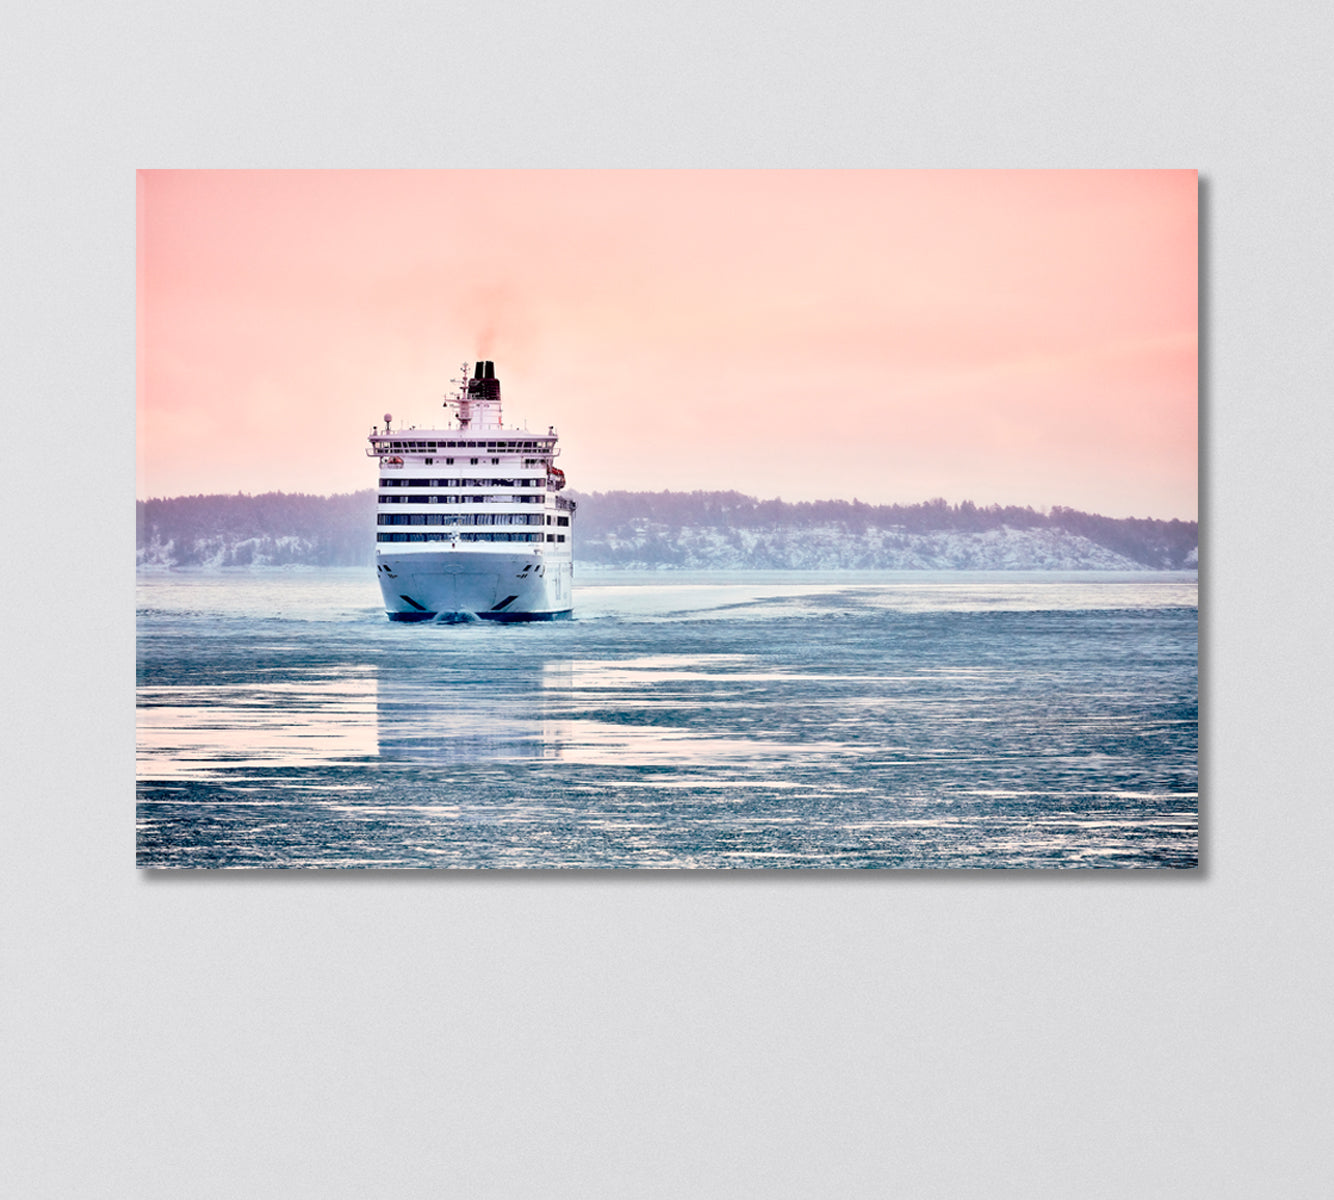 Big White Cruise Liner Ship in the Fjord of Norway Canvas Print-Canvas Print-CetArt-1 Panel-24x16 inches-CetArt